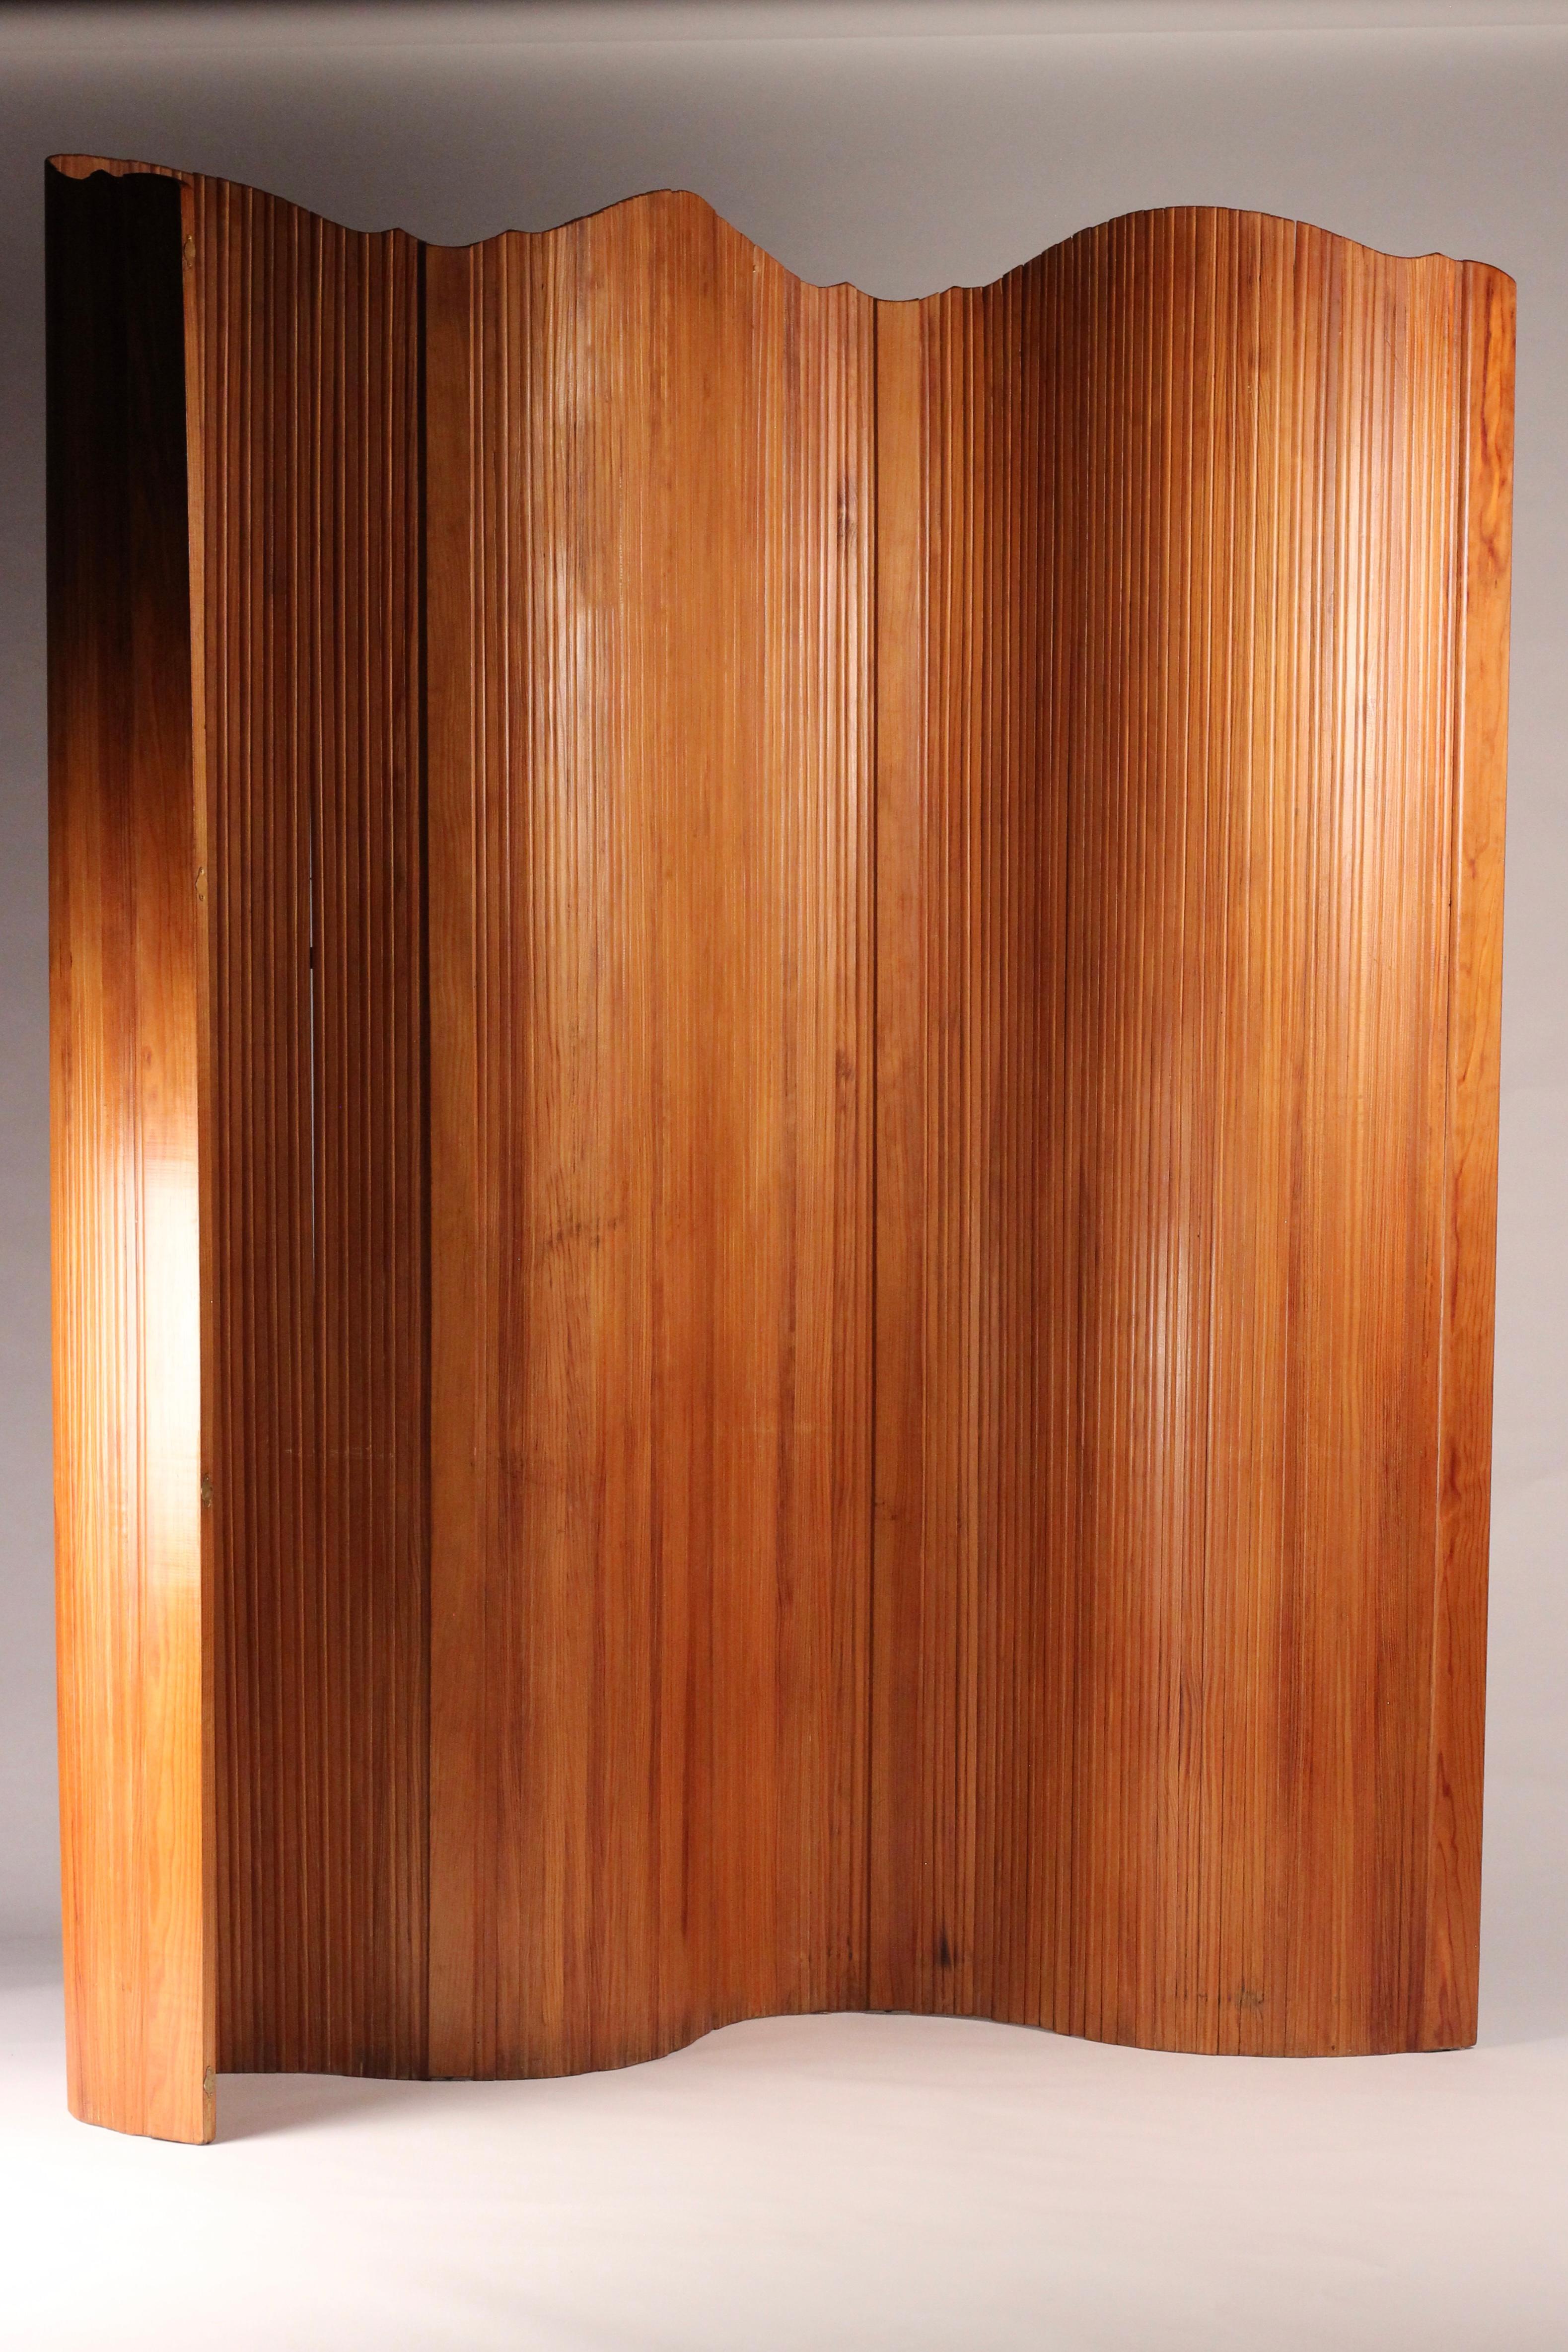 French Art Deco tambour screen room divider in Pine 1930’s attributed Baumman 2